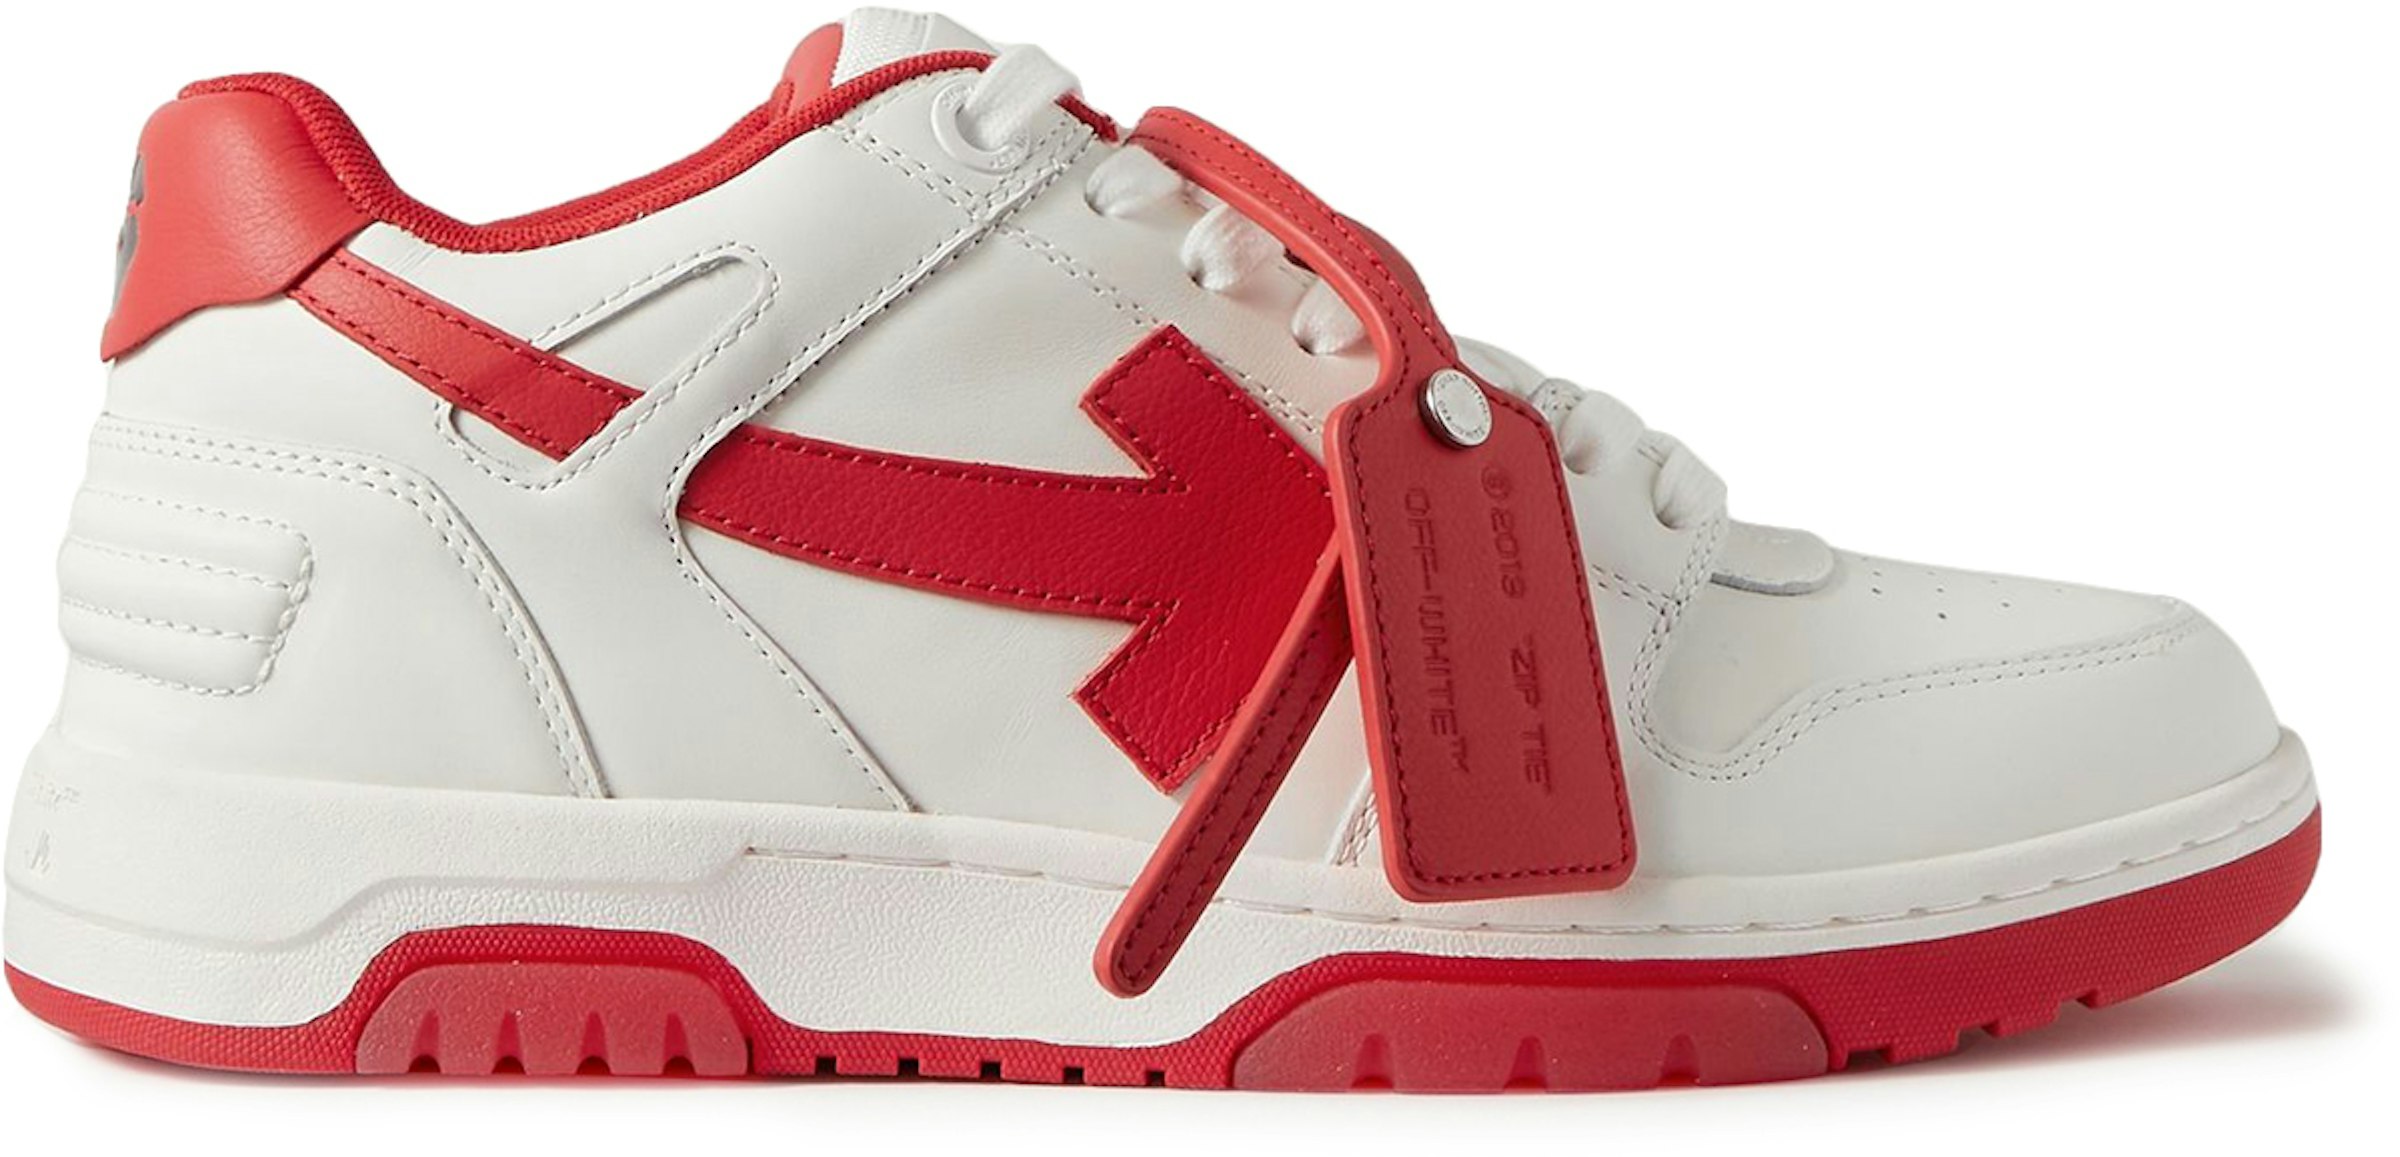 Of Office "OOO" Low Tops White Red Men's - OMIA189S22LEA0010125 / - US